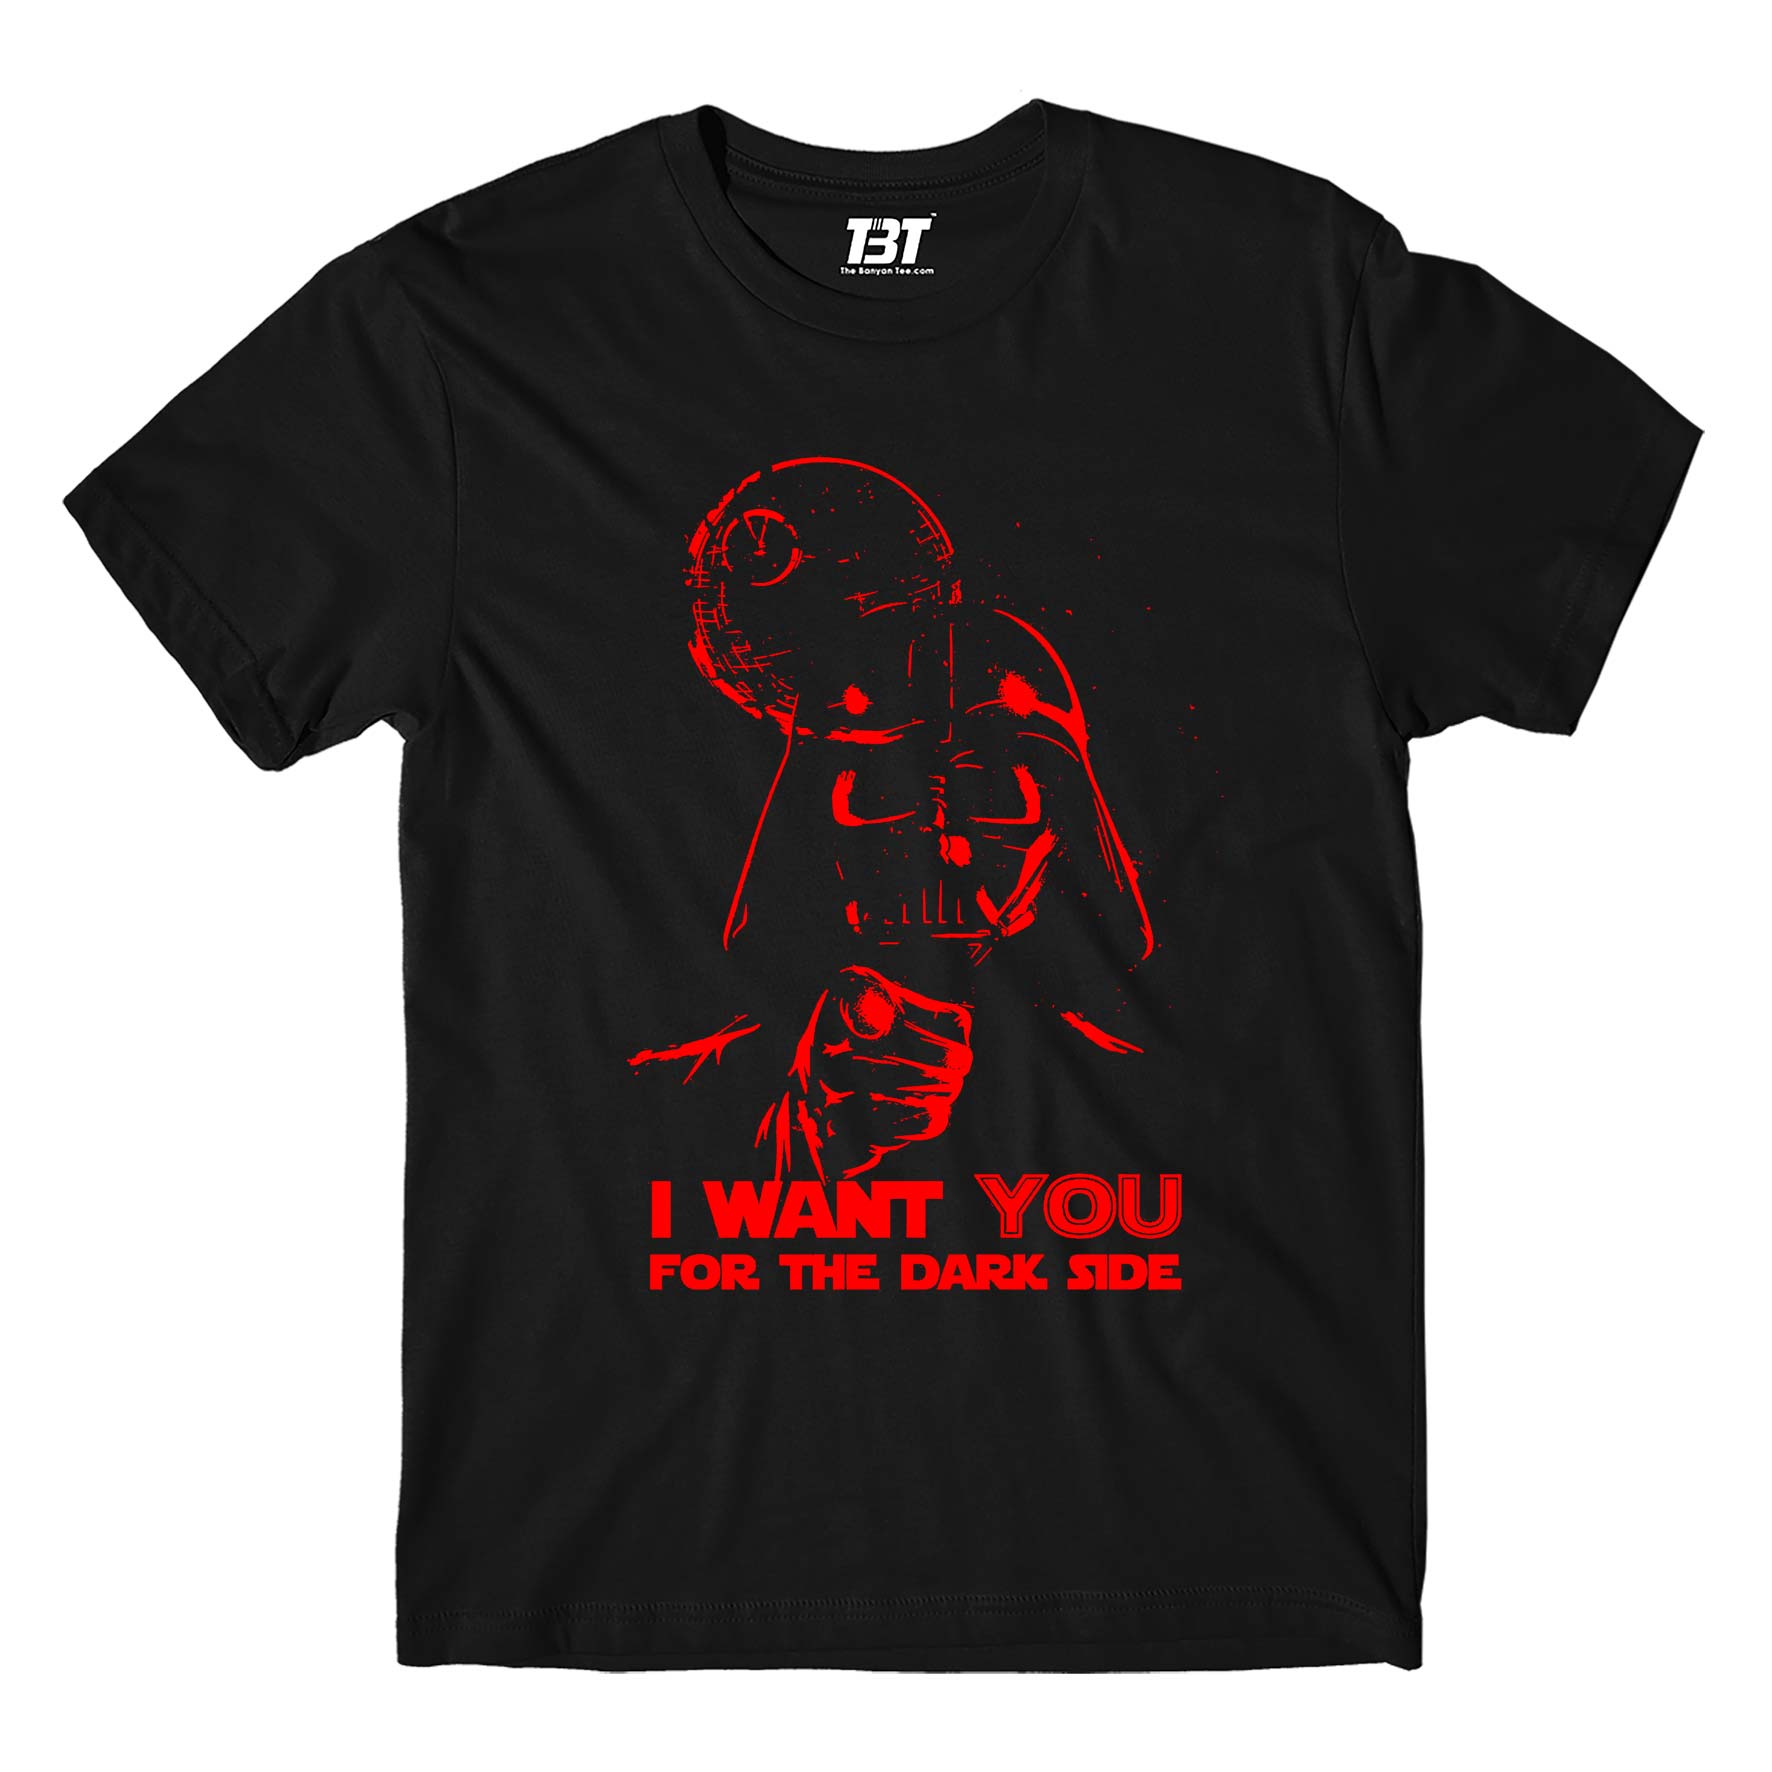 star wars i want you for the dark side t-shirt tv & movies buy online united states usa the banyan tee tbt men women girls boys unisex black darth vader